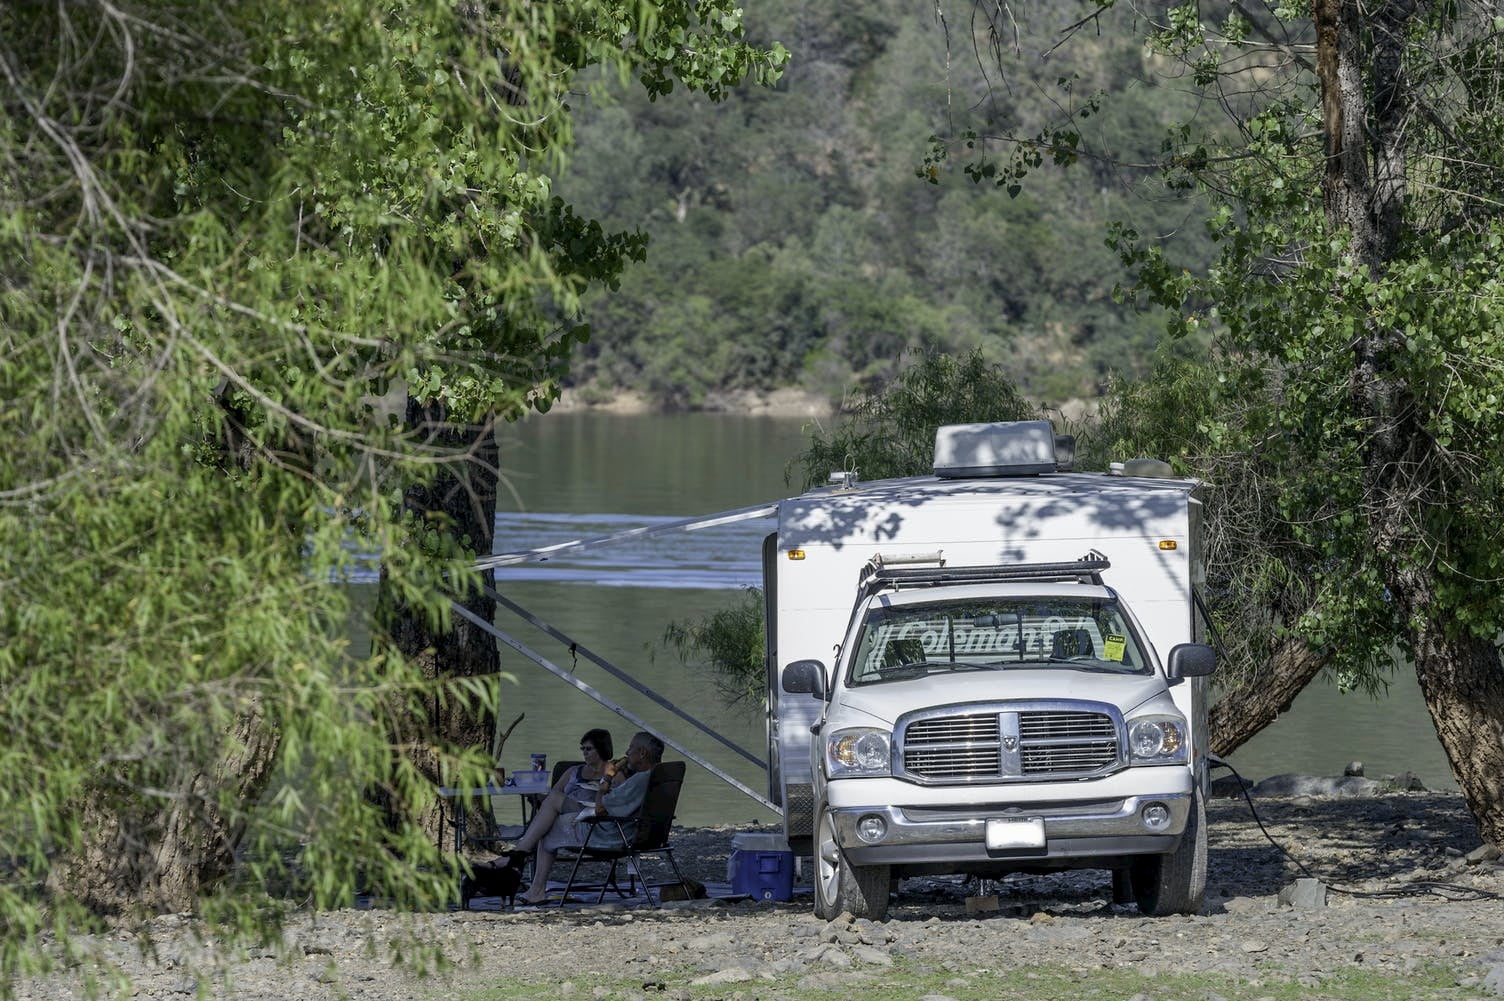 People lounging beside pickup truck with pull behind camper on a lake.